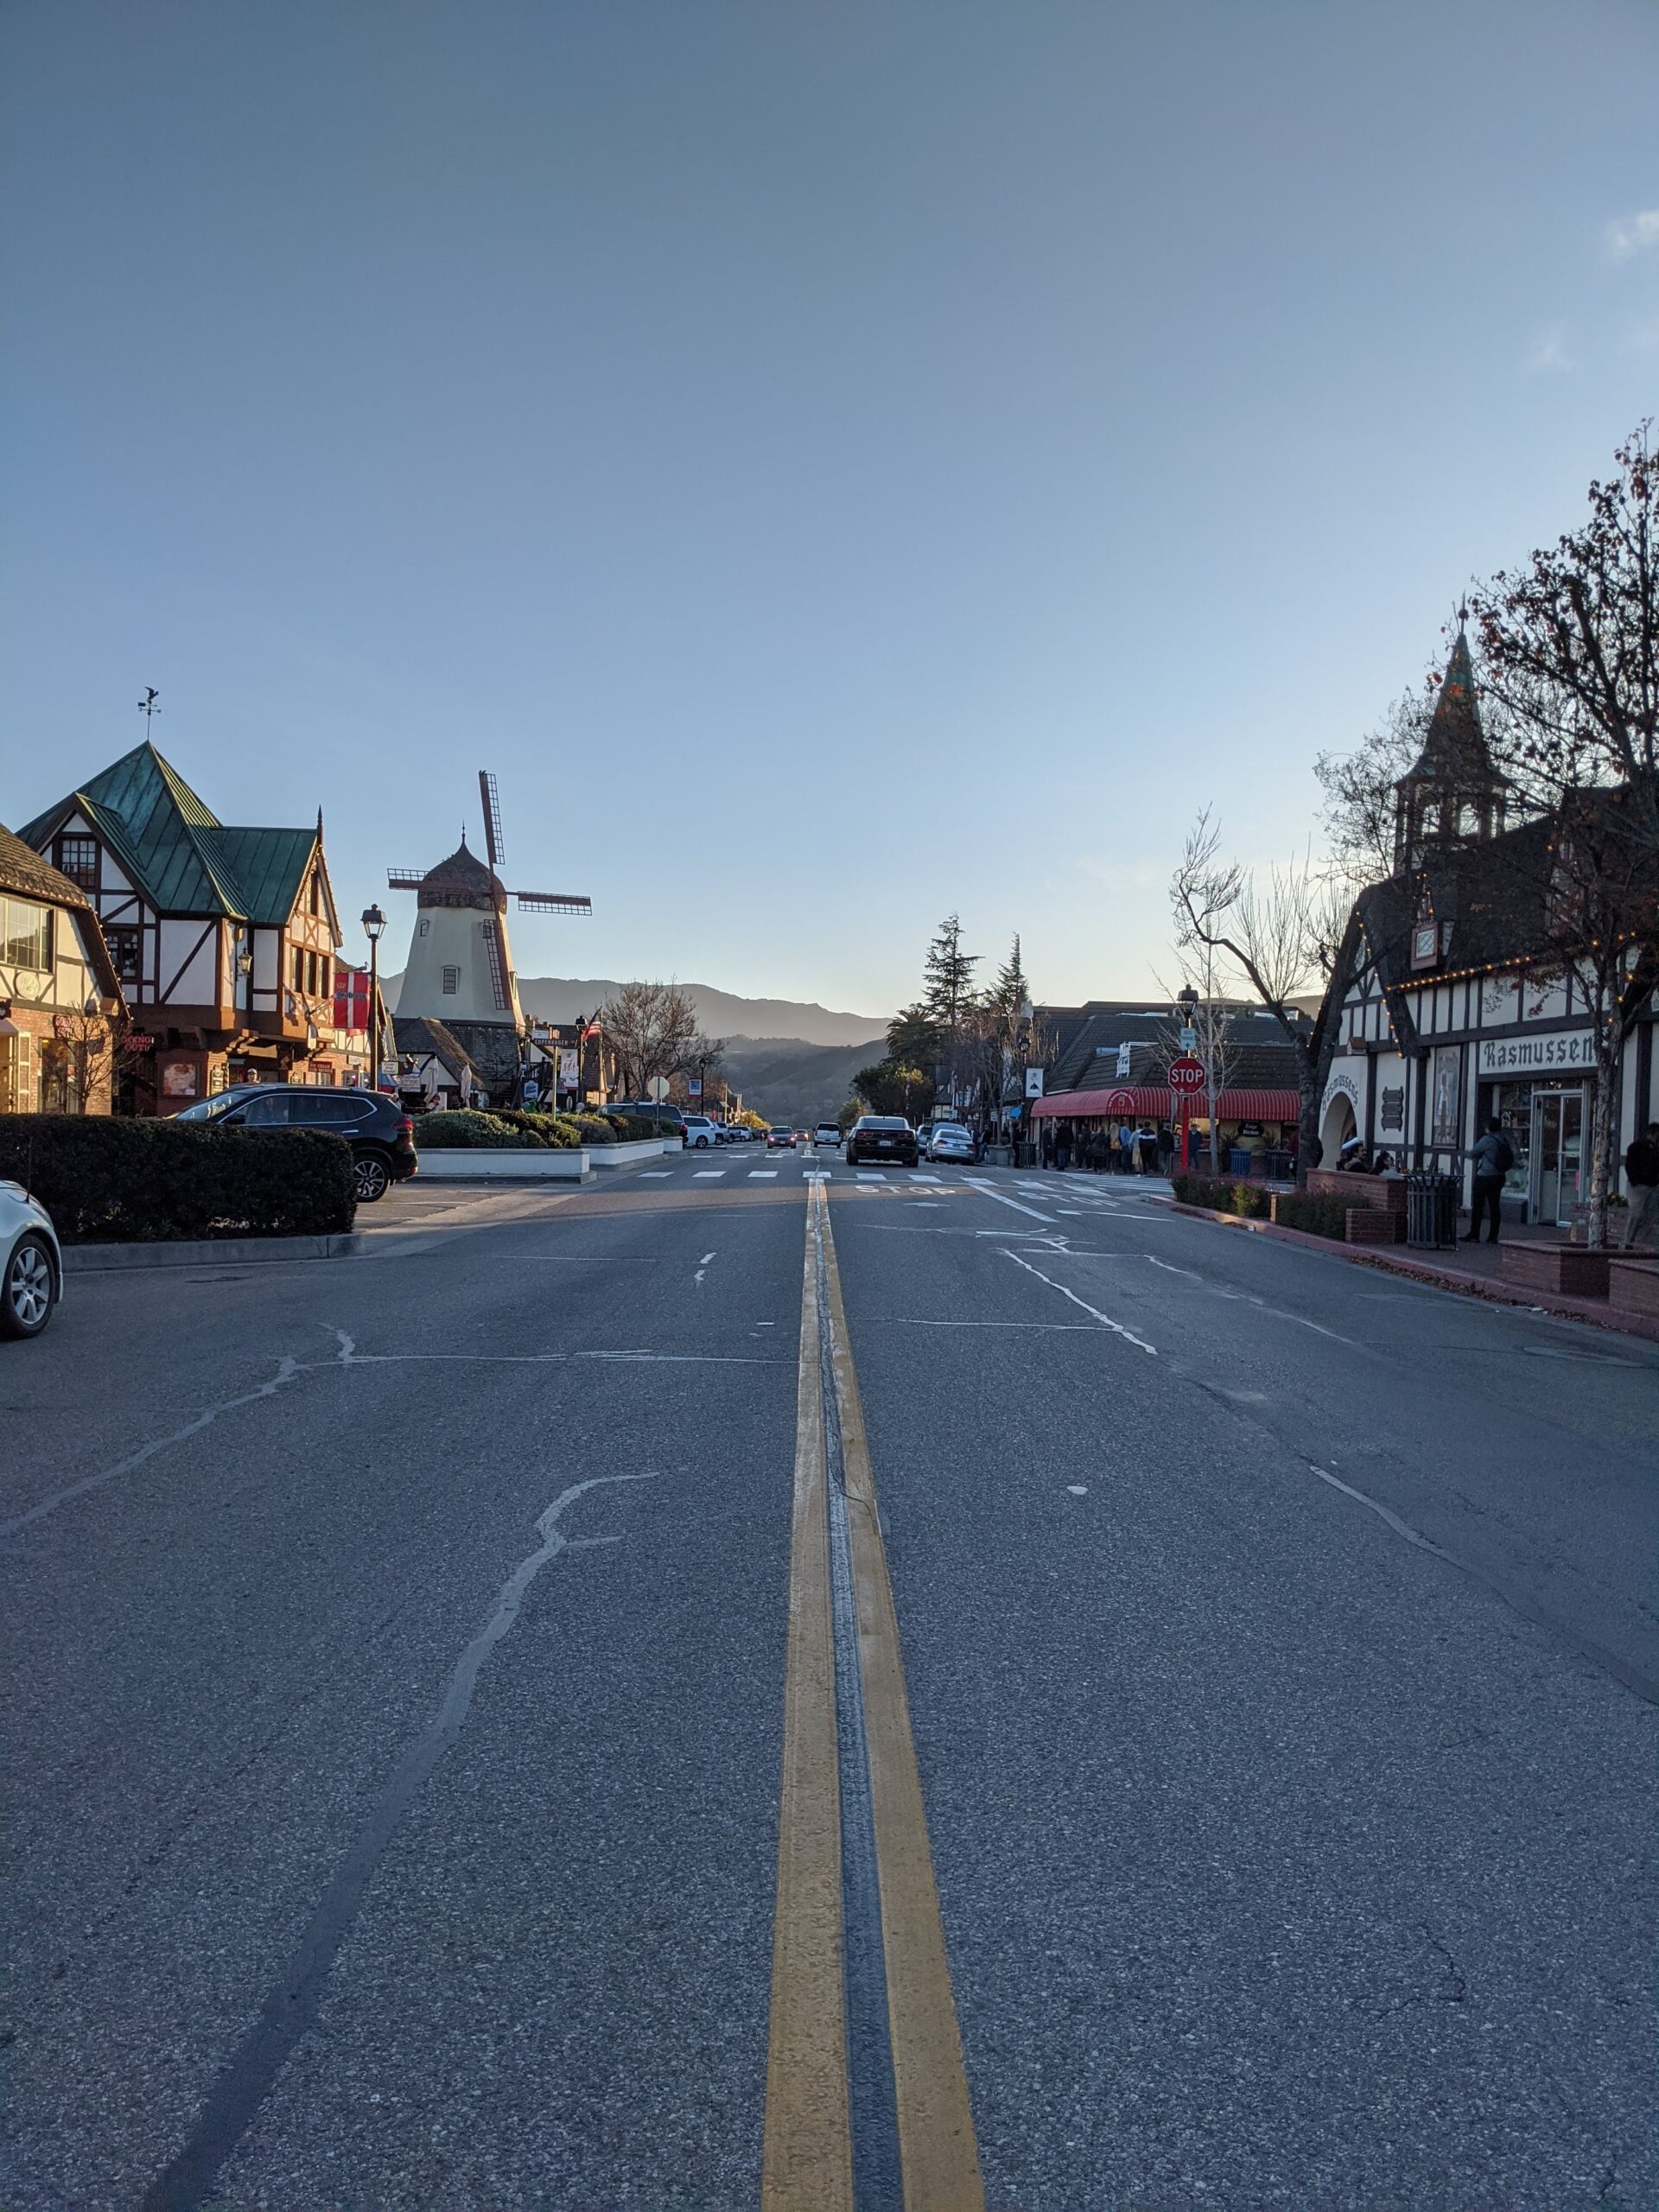 View of Solvang from the street with iconic windmill in the scene. 